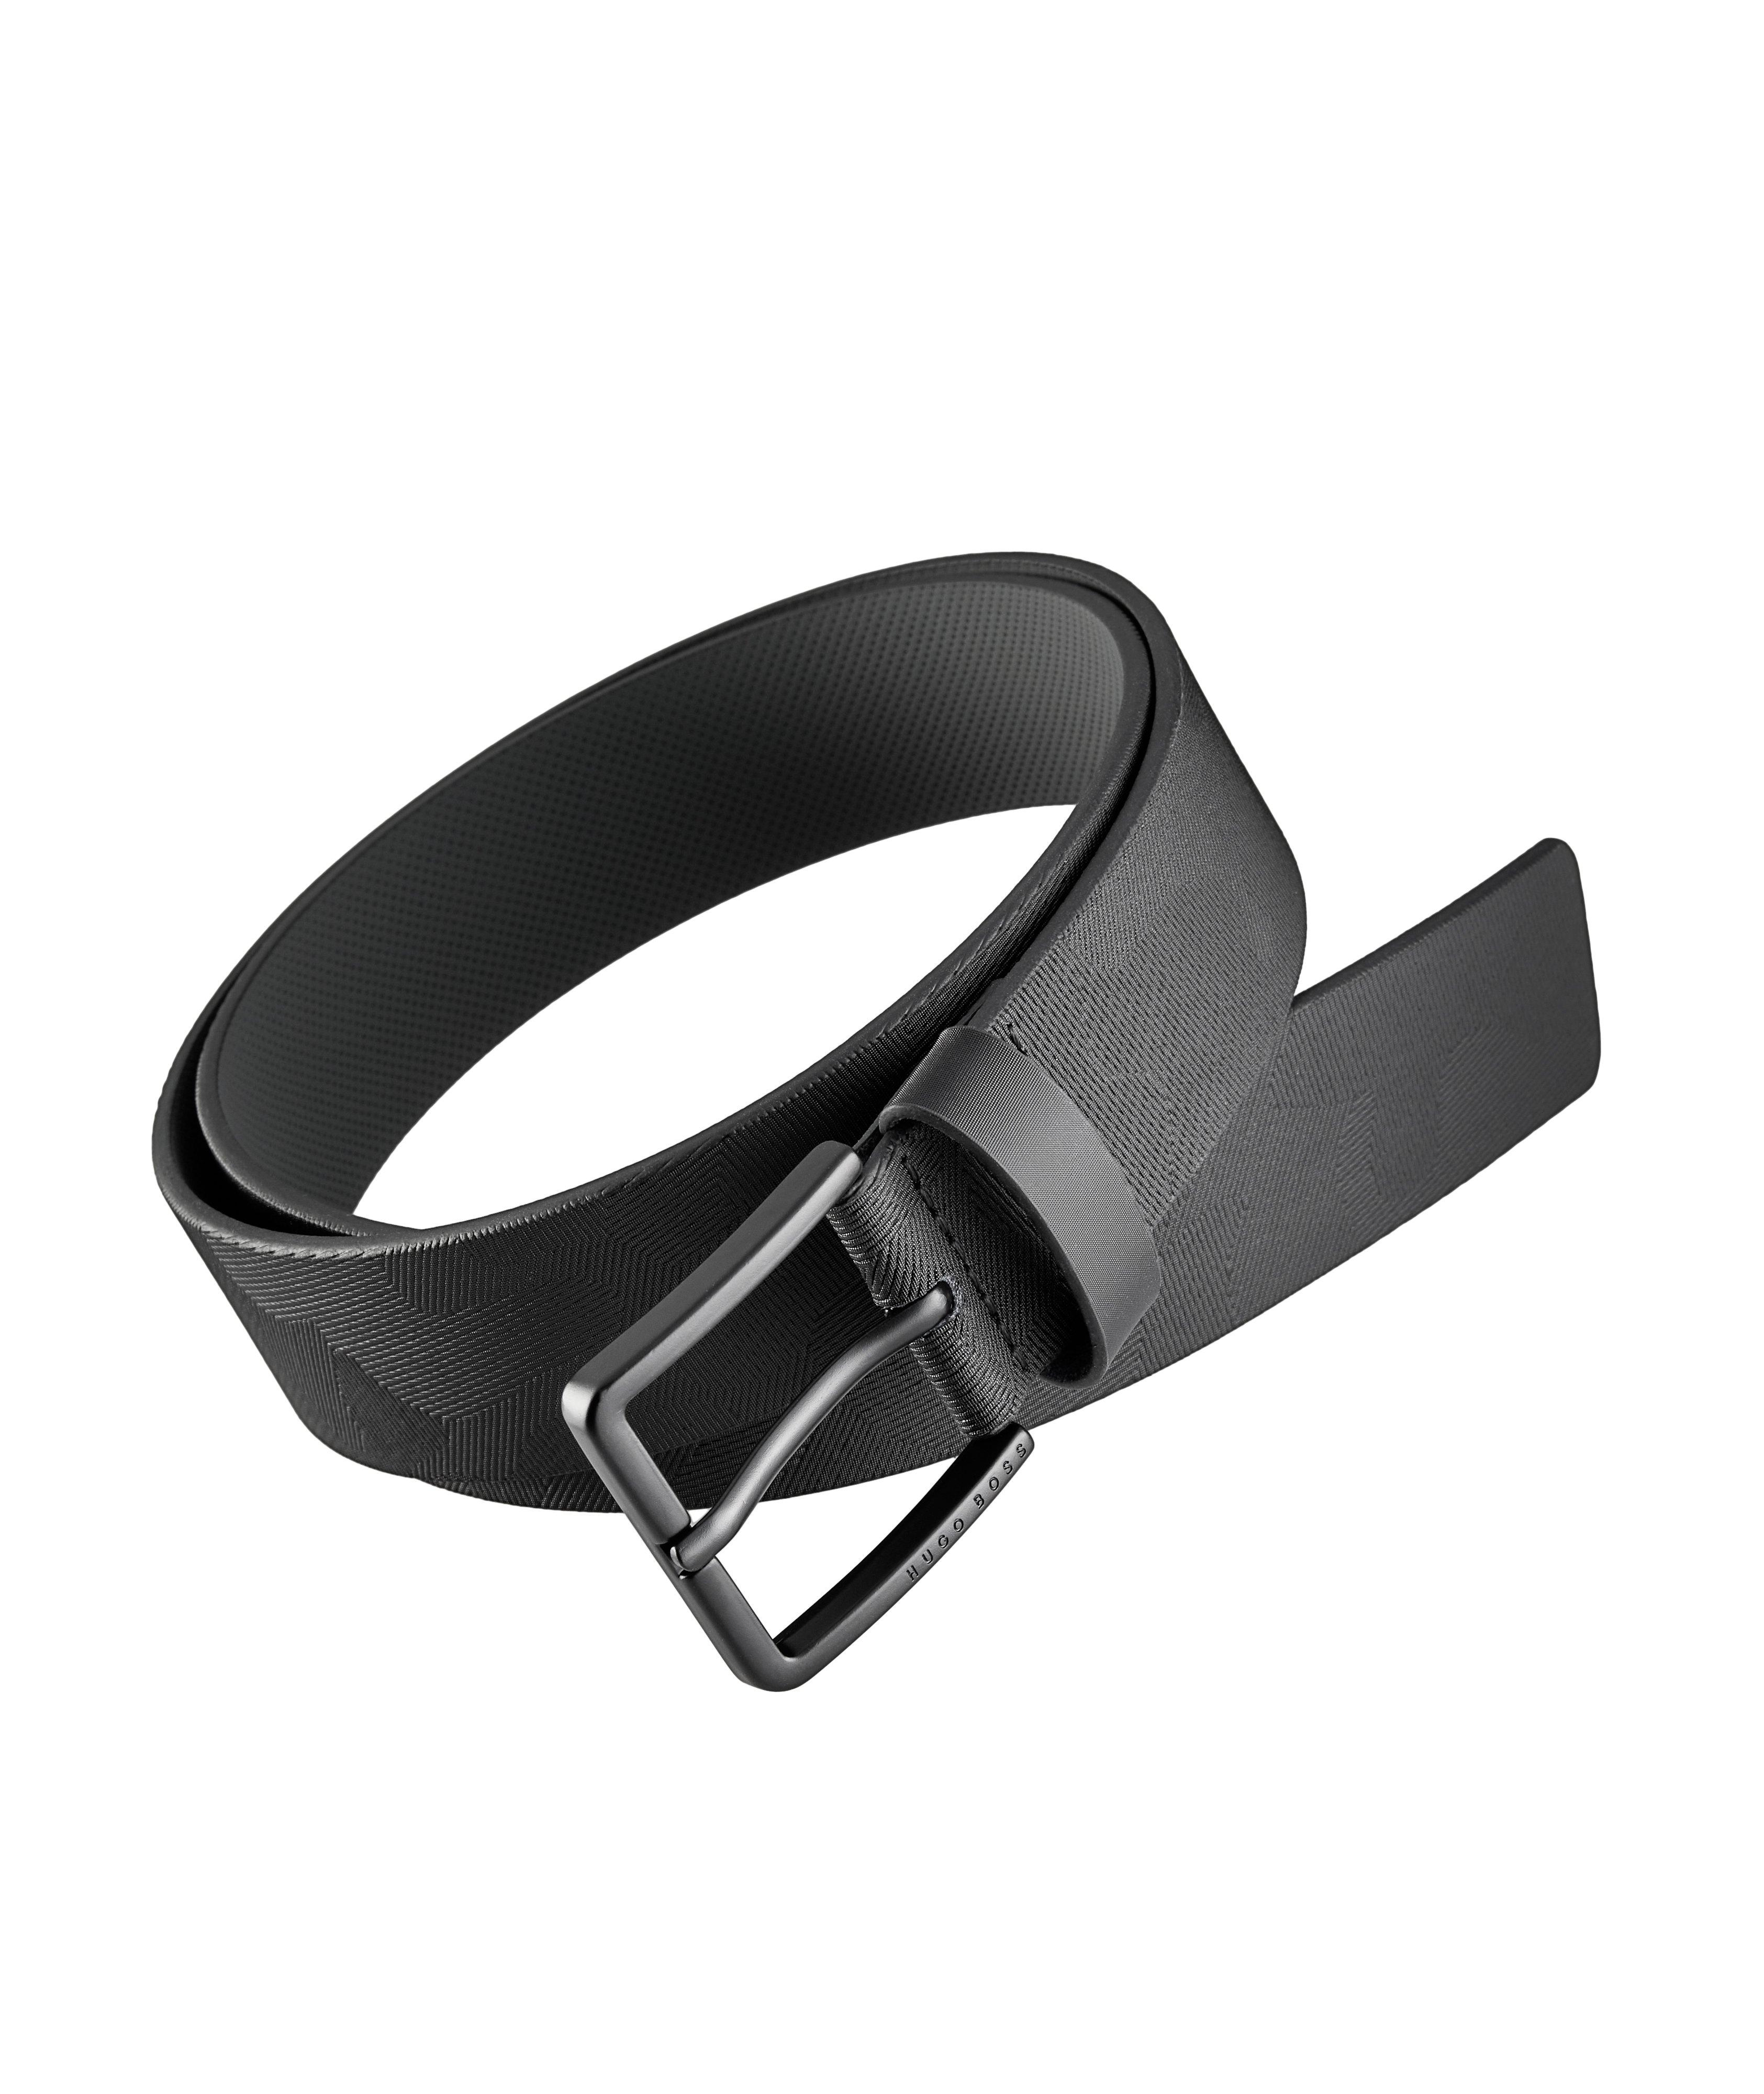 Ther-I-Camu Reversible Leather Belt image 0